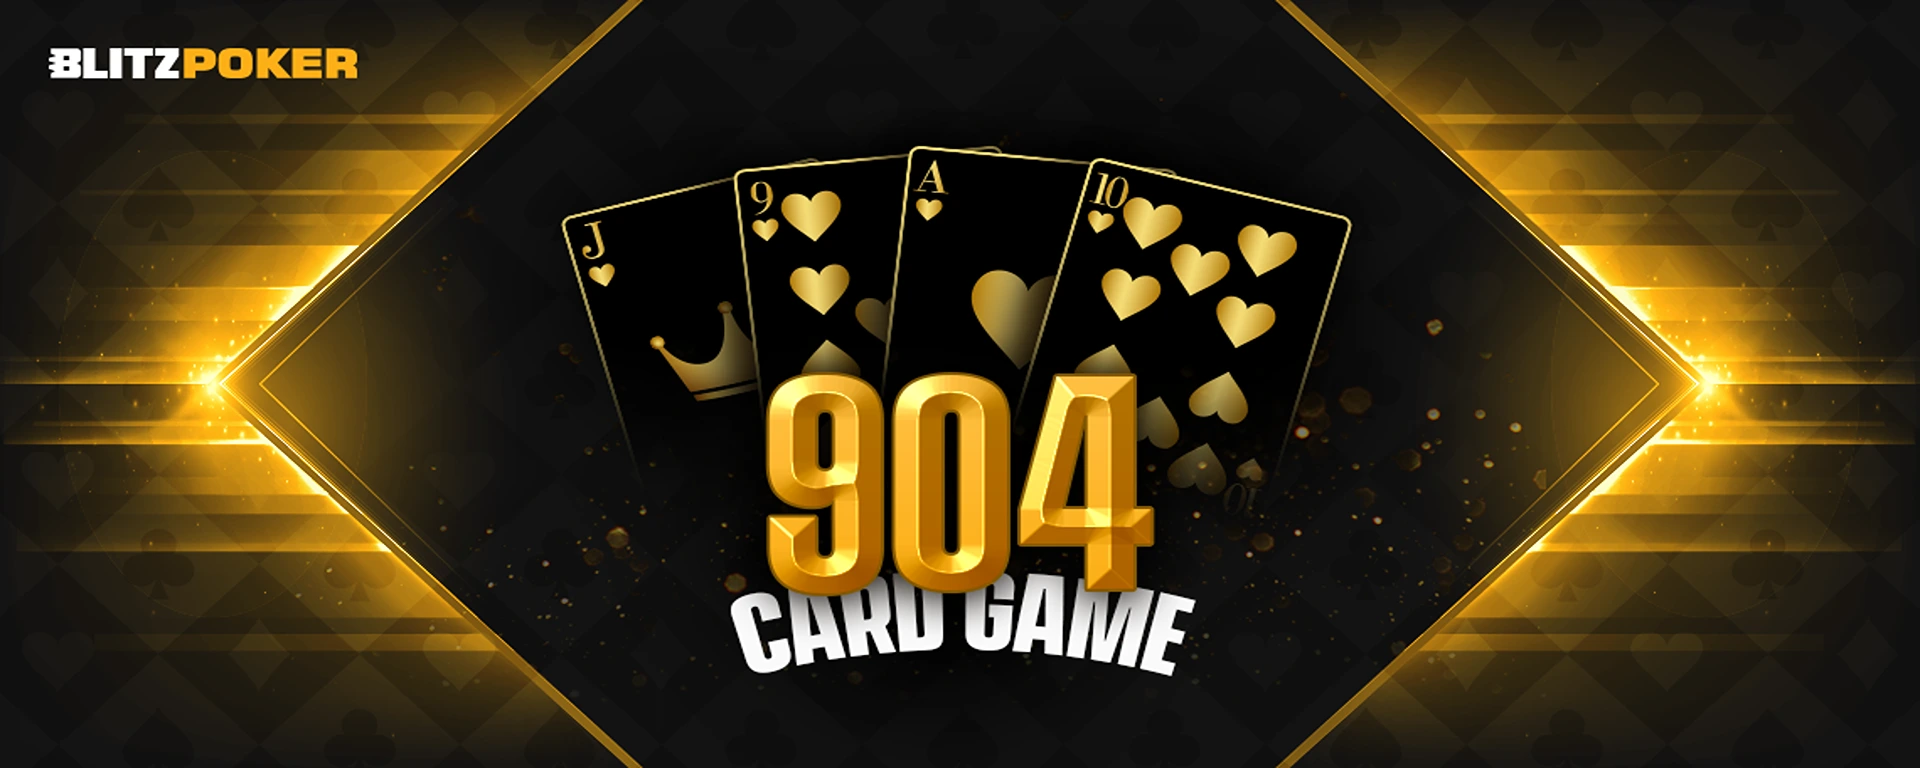 904 Card Game Rules